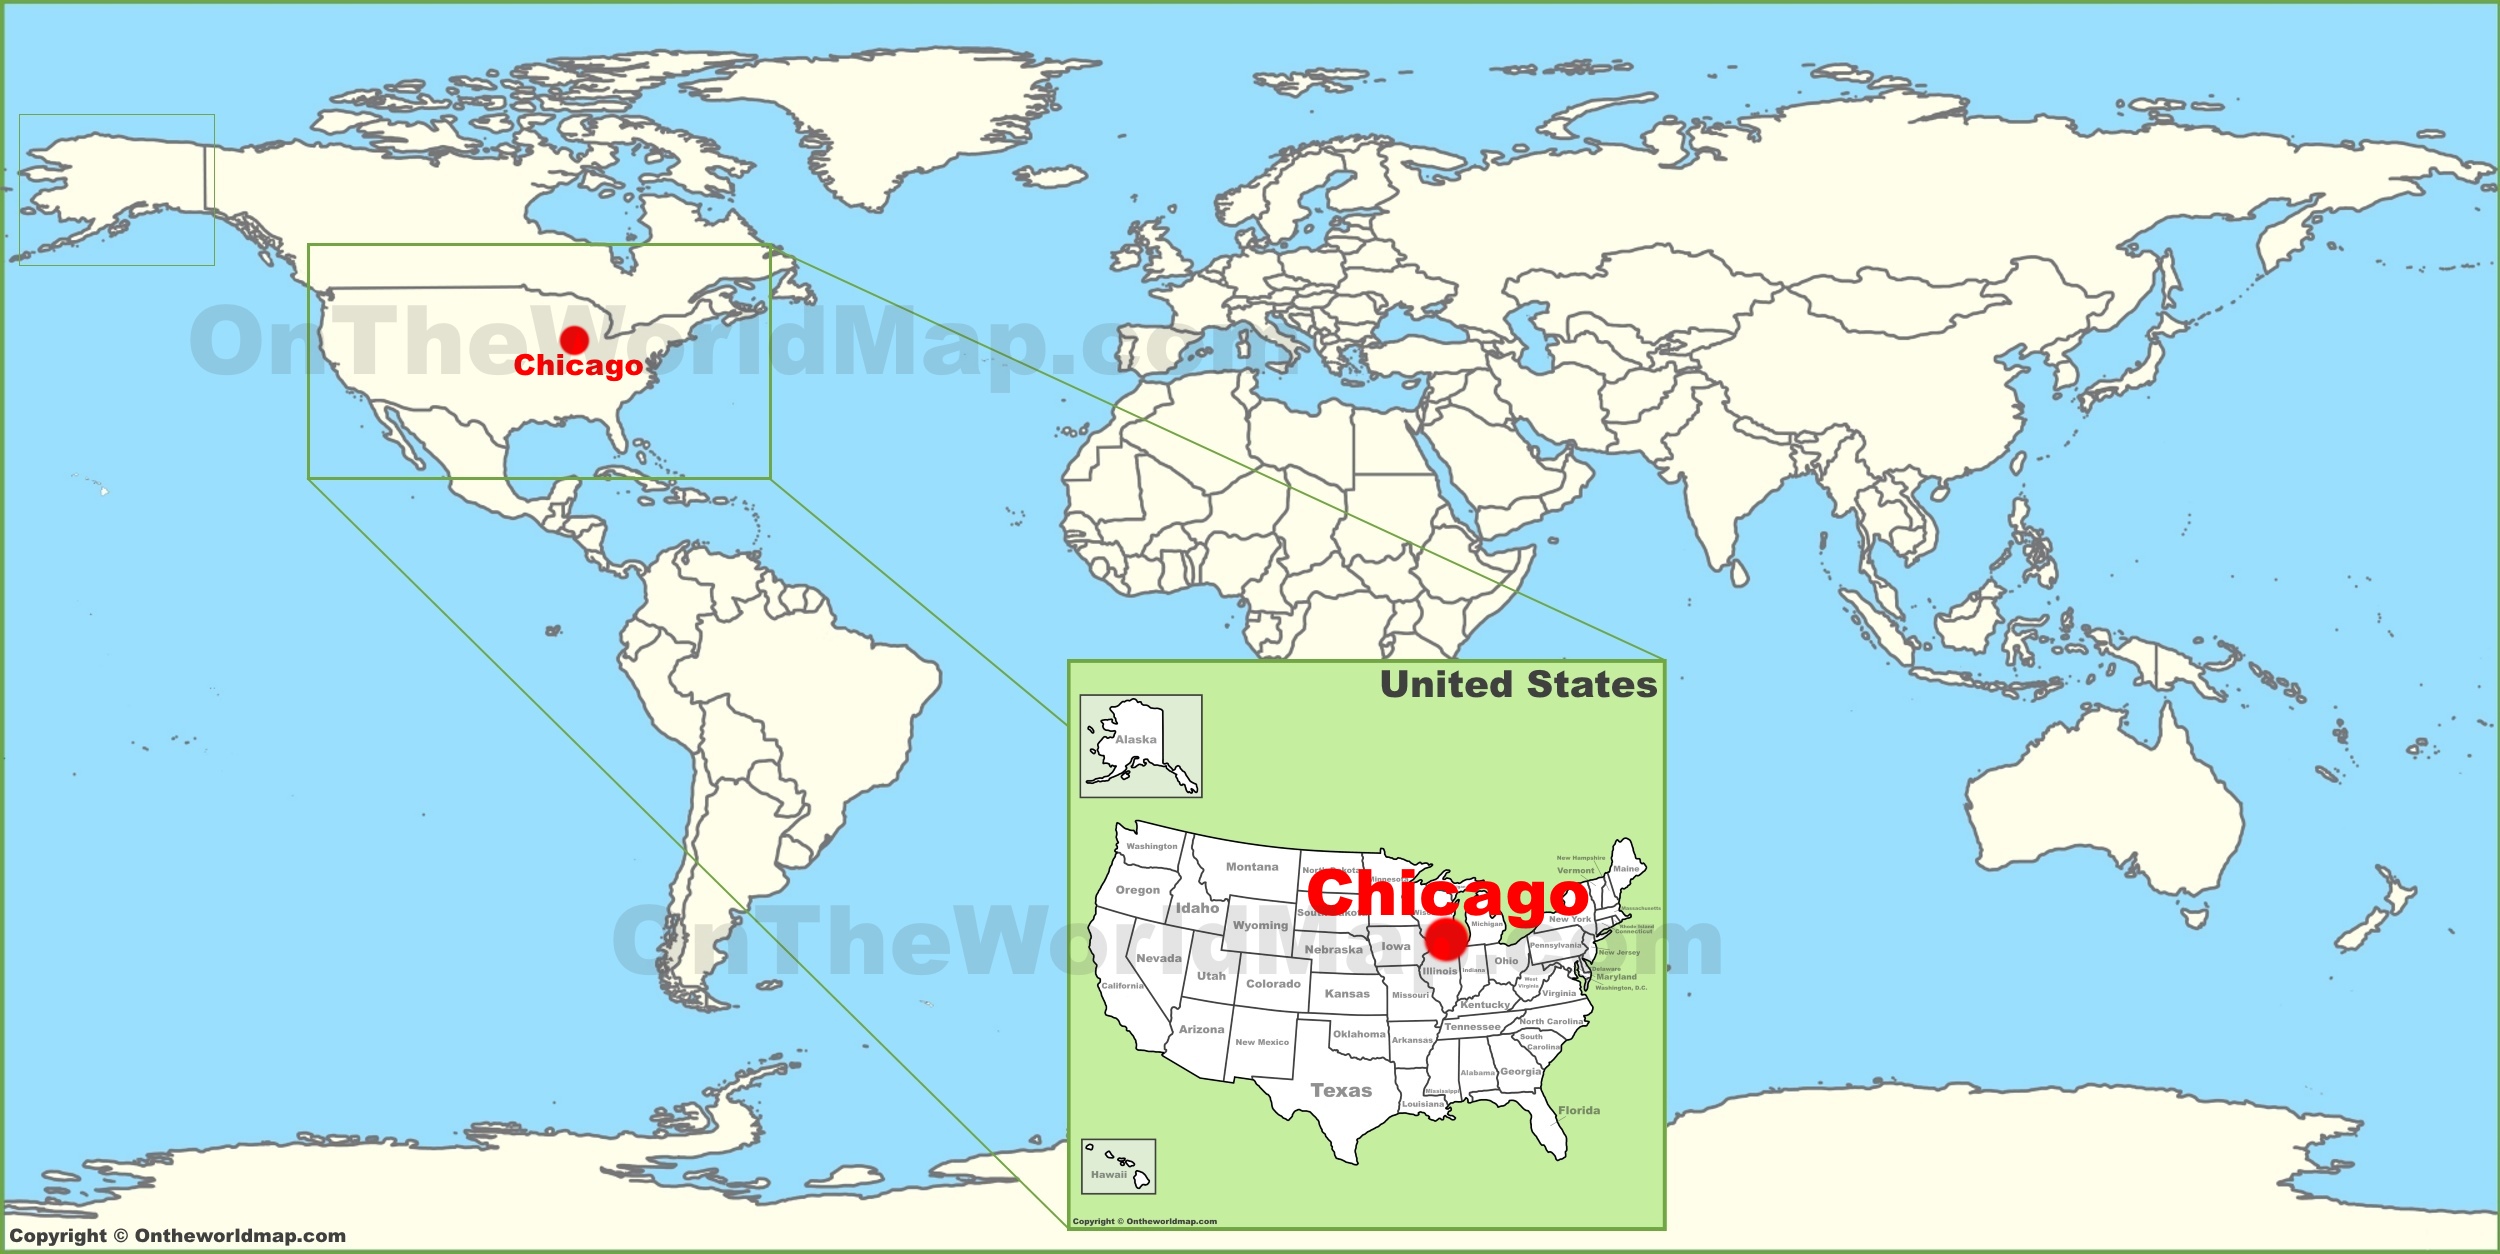 Chicago On The World Map